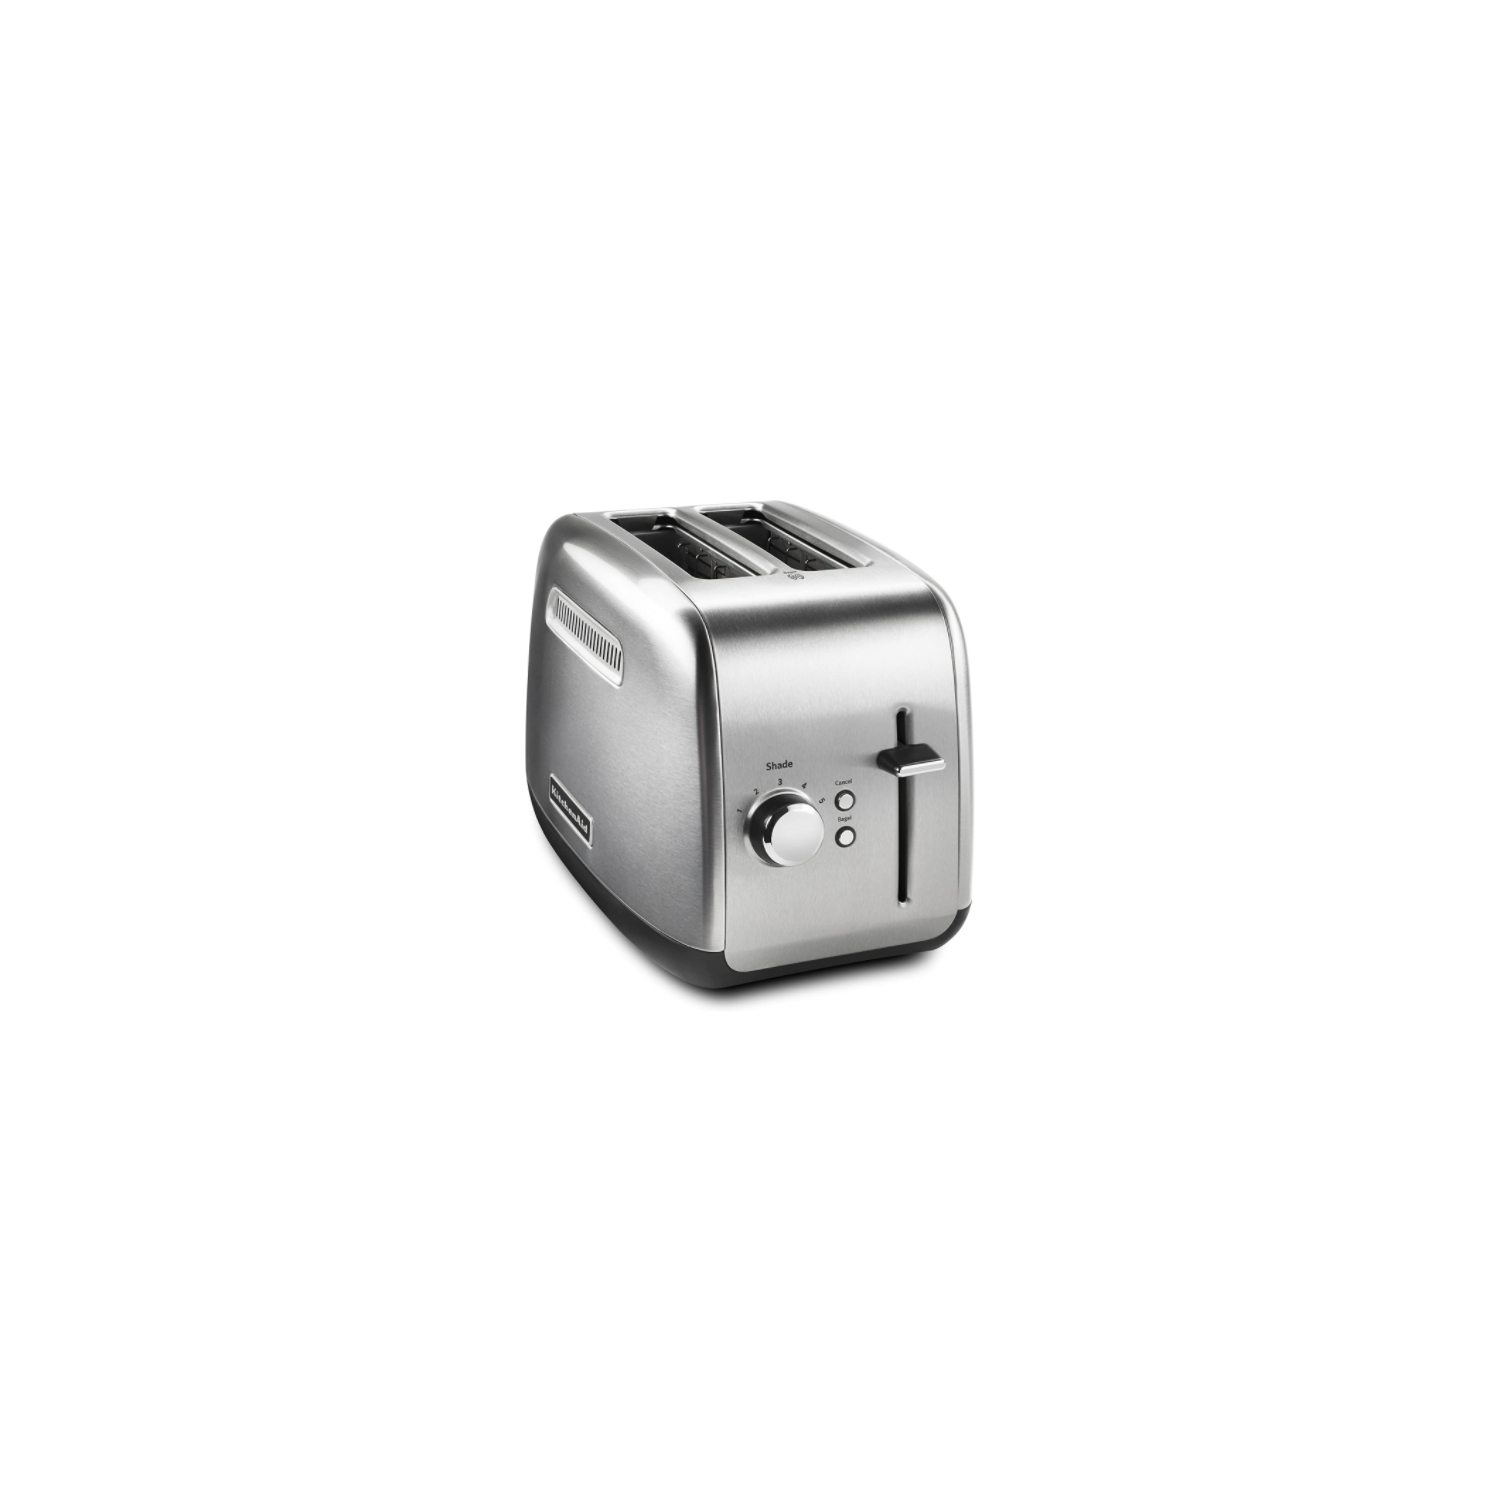 KitchenAid KMT2115SX 2-Slice Toaster with Manual High-Lift Lever, Brushed Stainless, Metallic